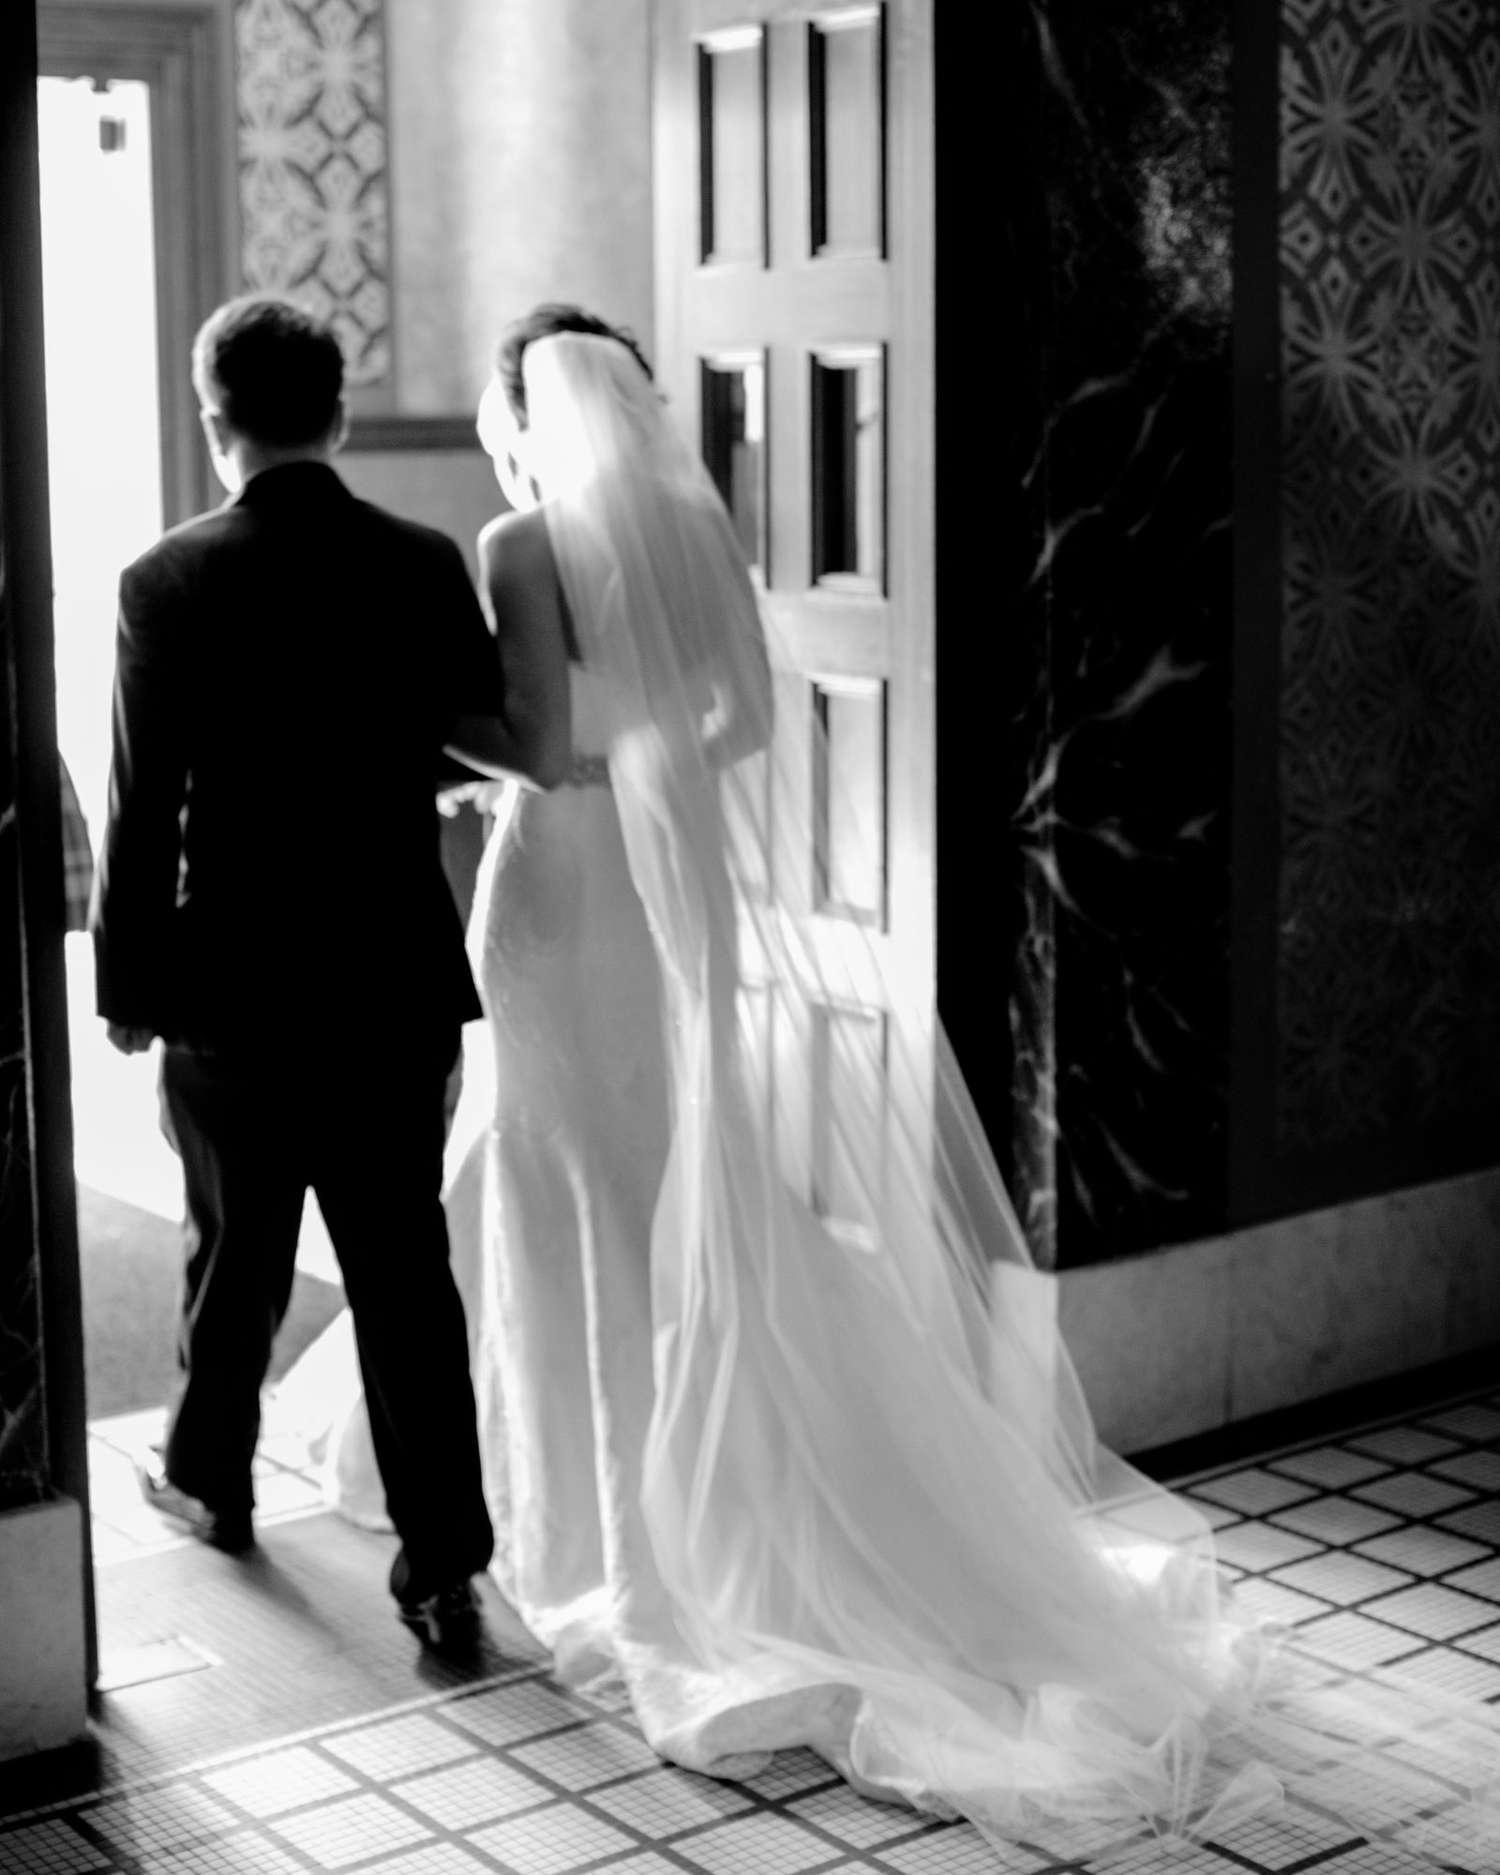 The Newlyweds' Exit